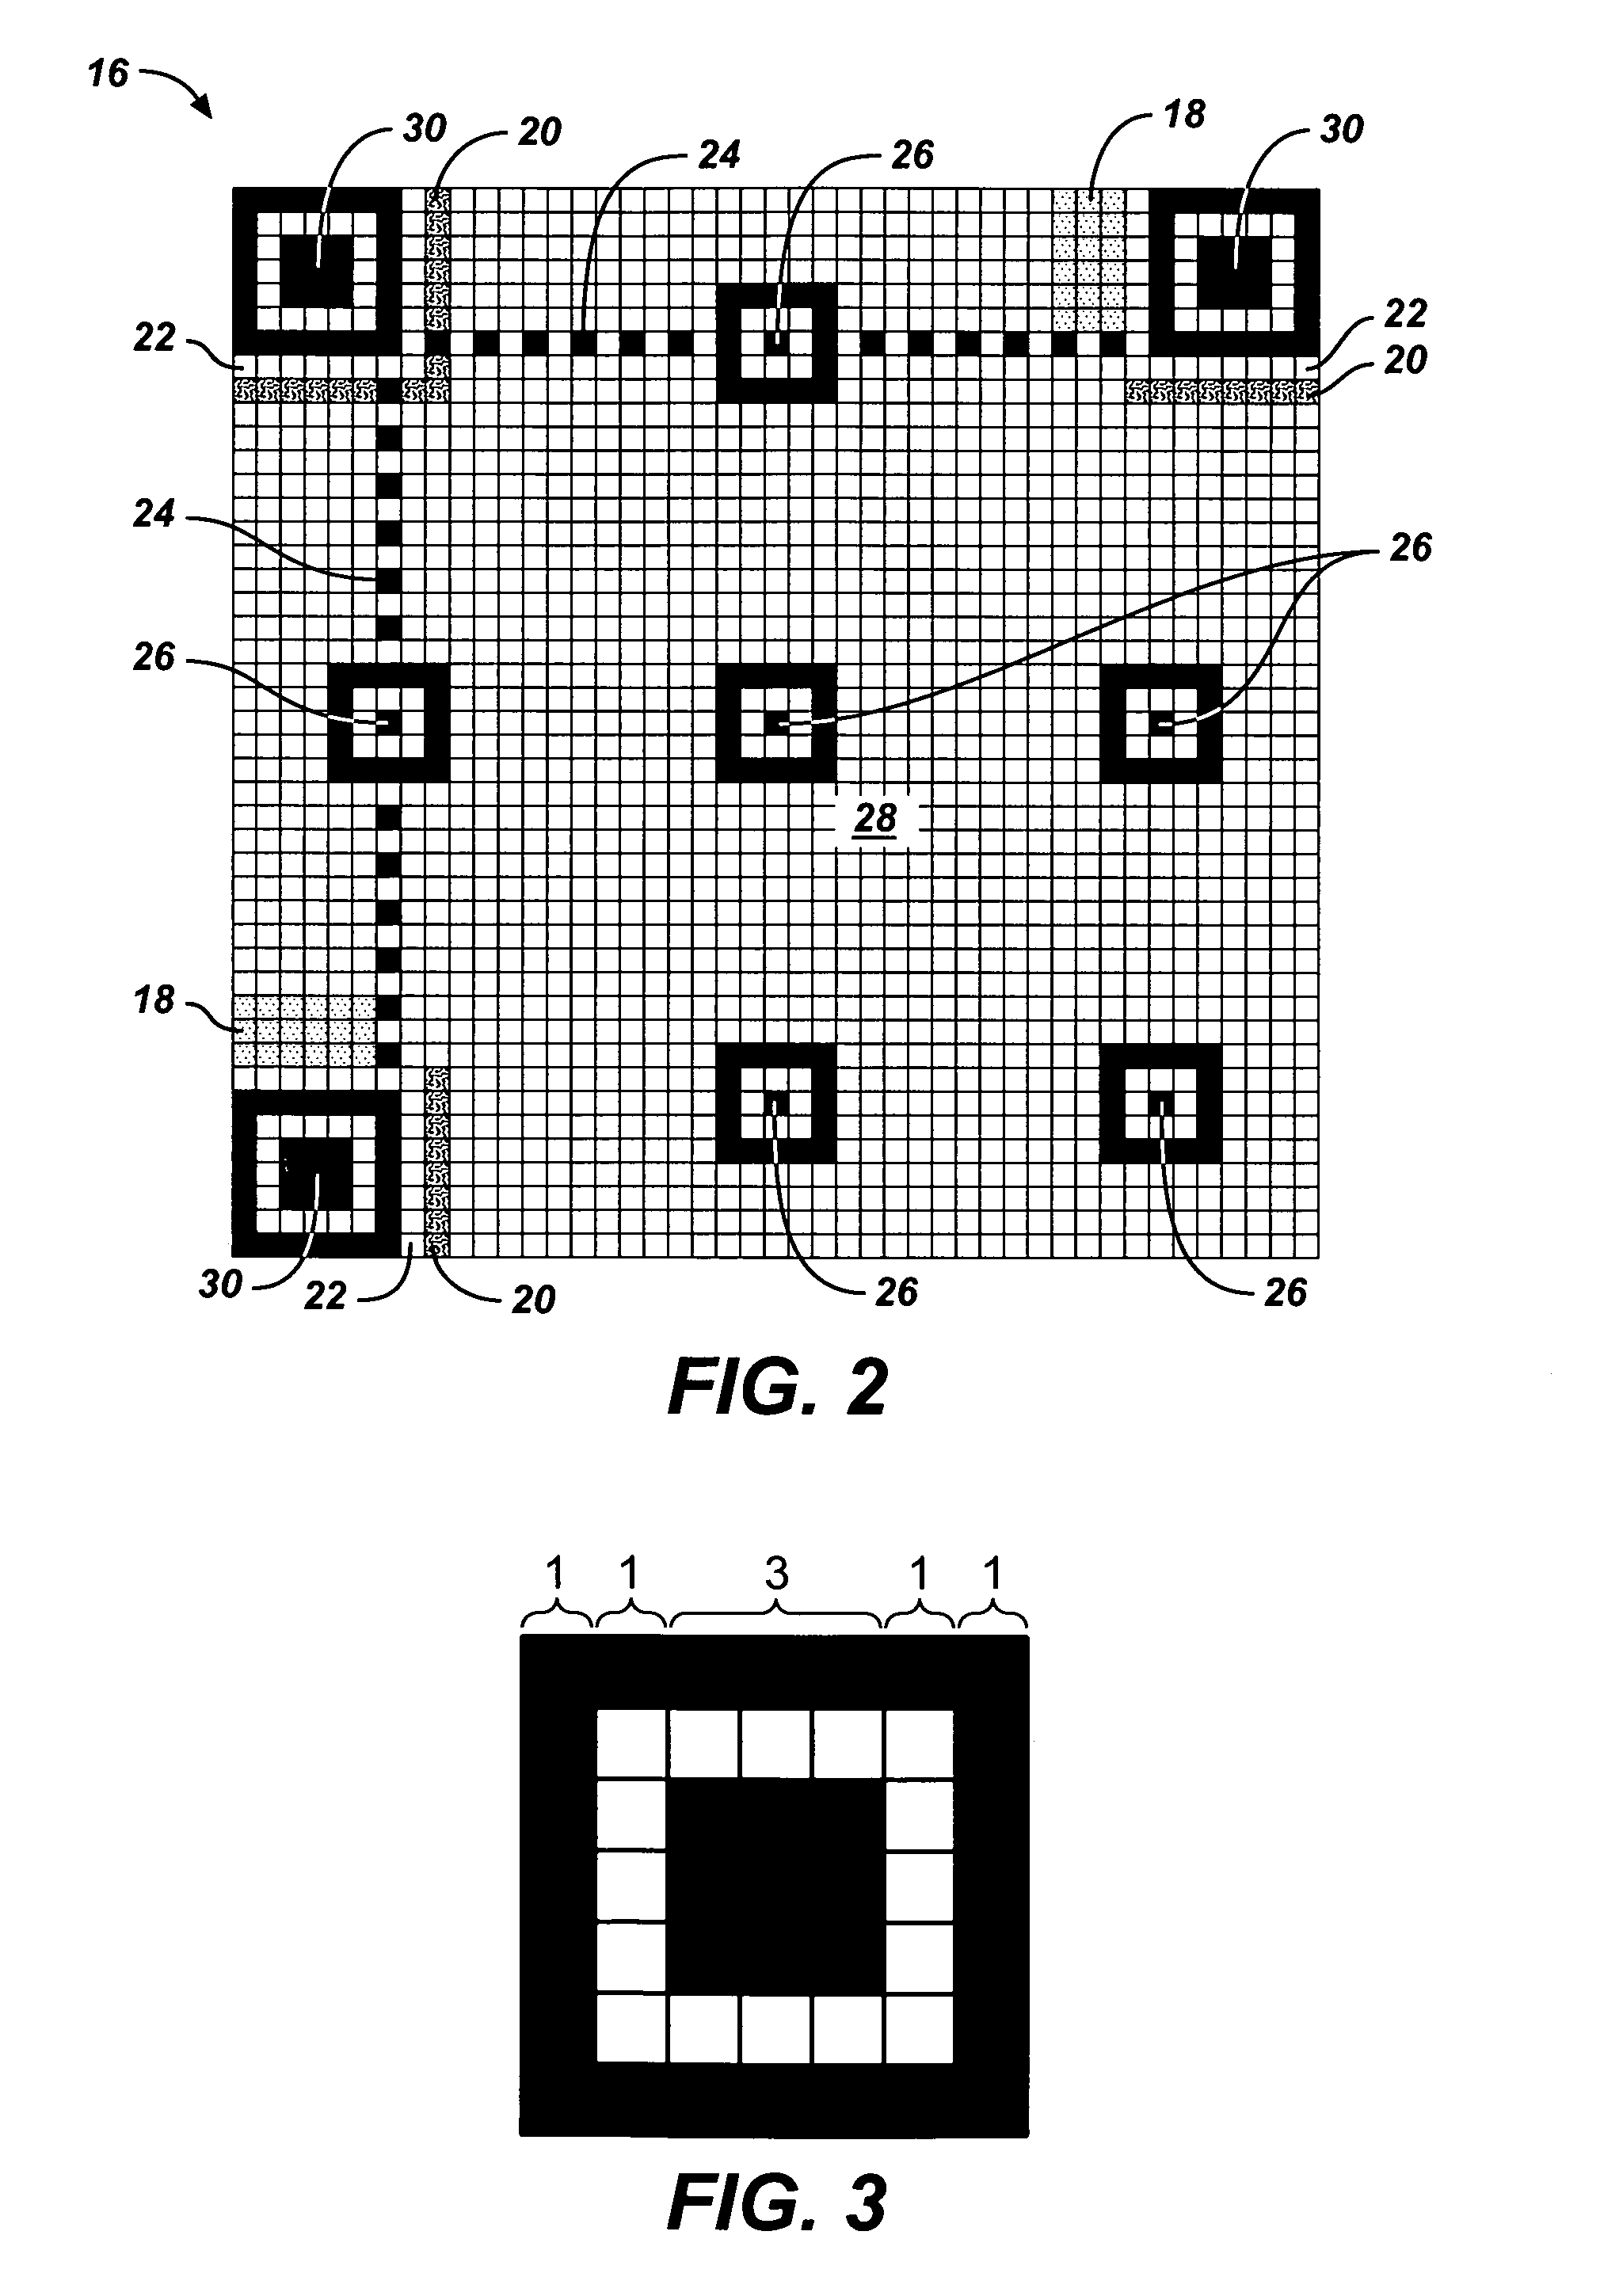 Method and apparatus for locating and decoding a two-dimensional machine-readable symbol